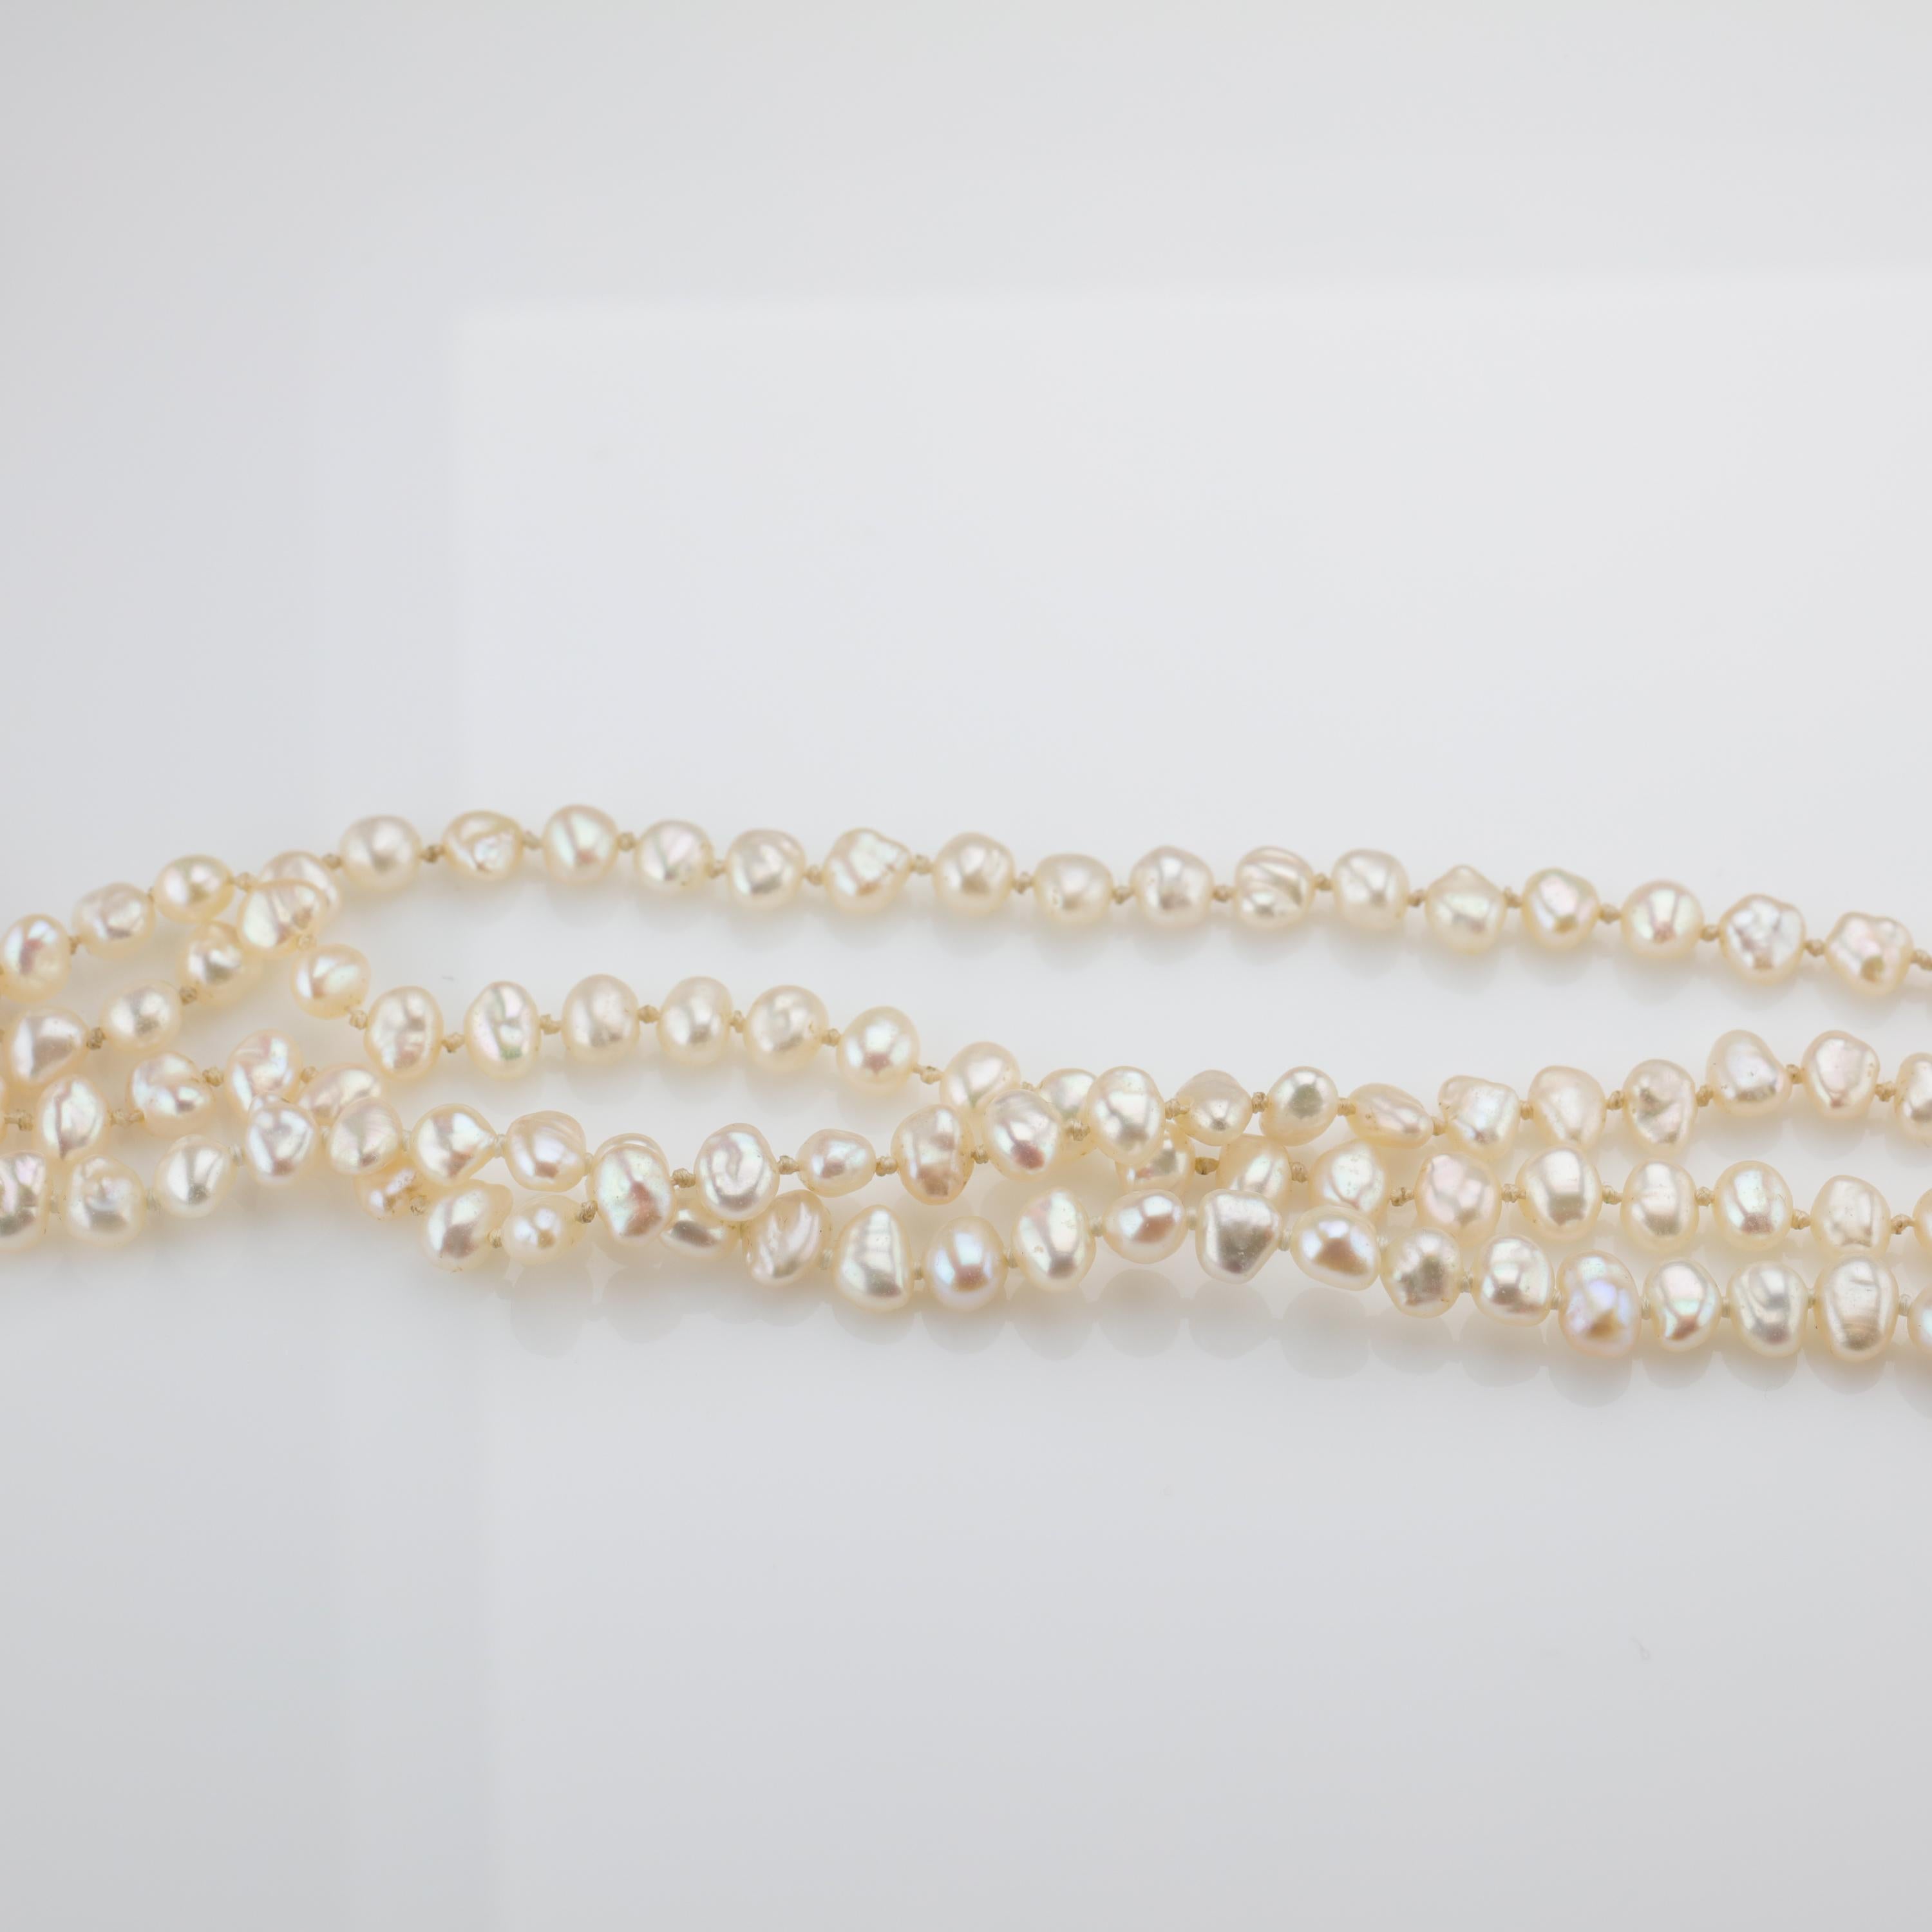 Gump's Pearl and Opal Necklace Features Rare & Authentic Biwa Pearls 2